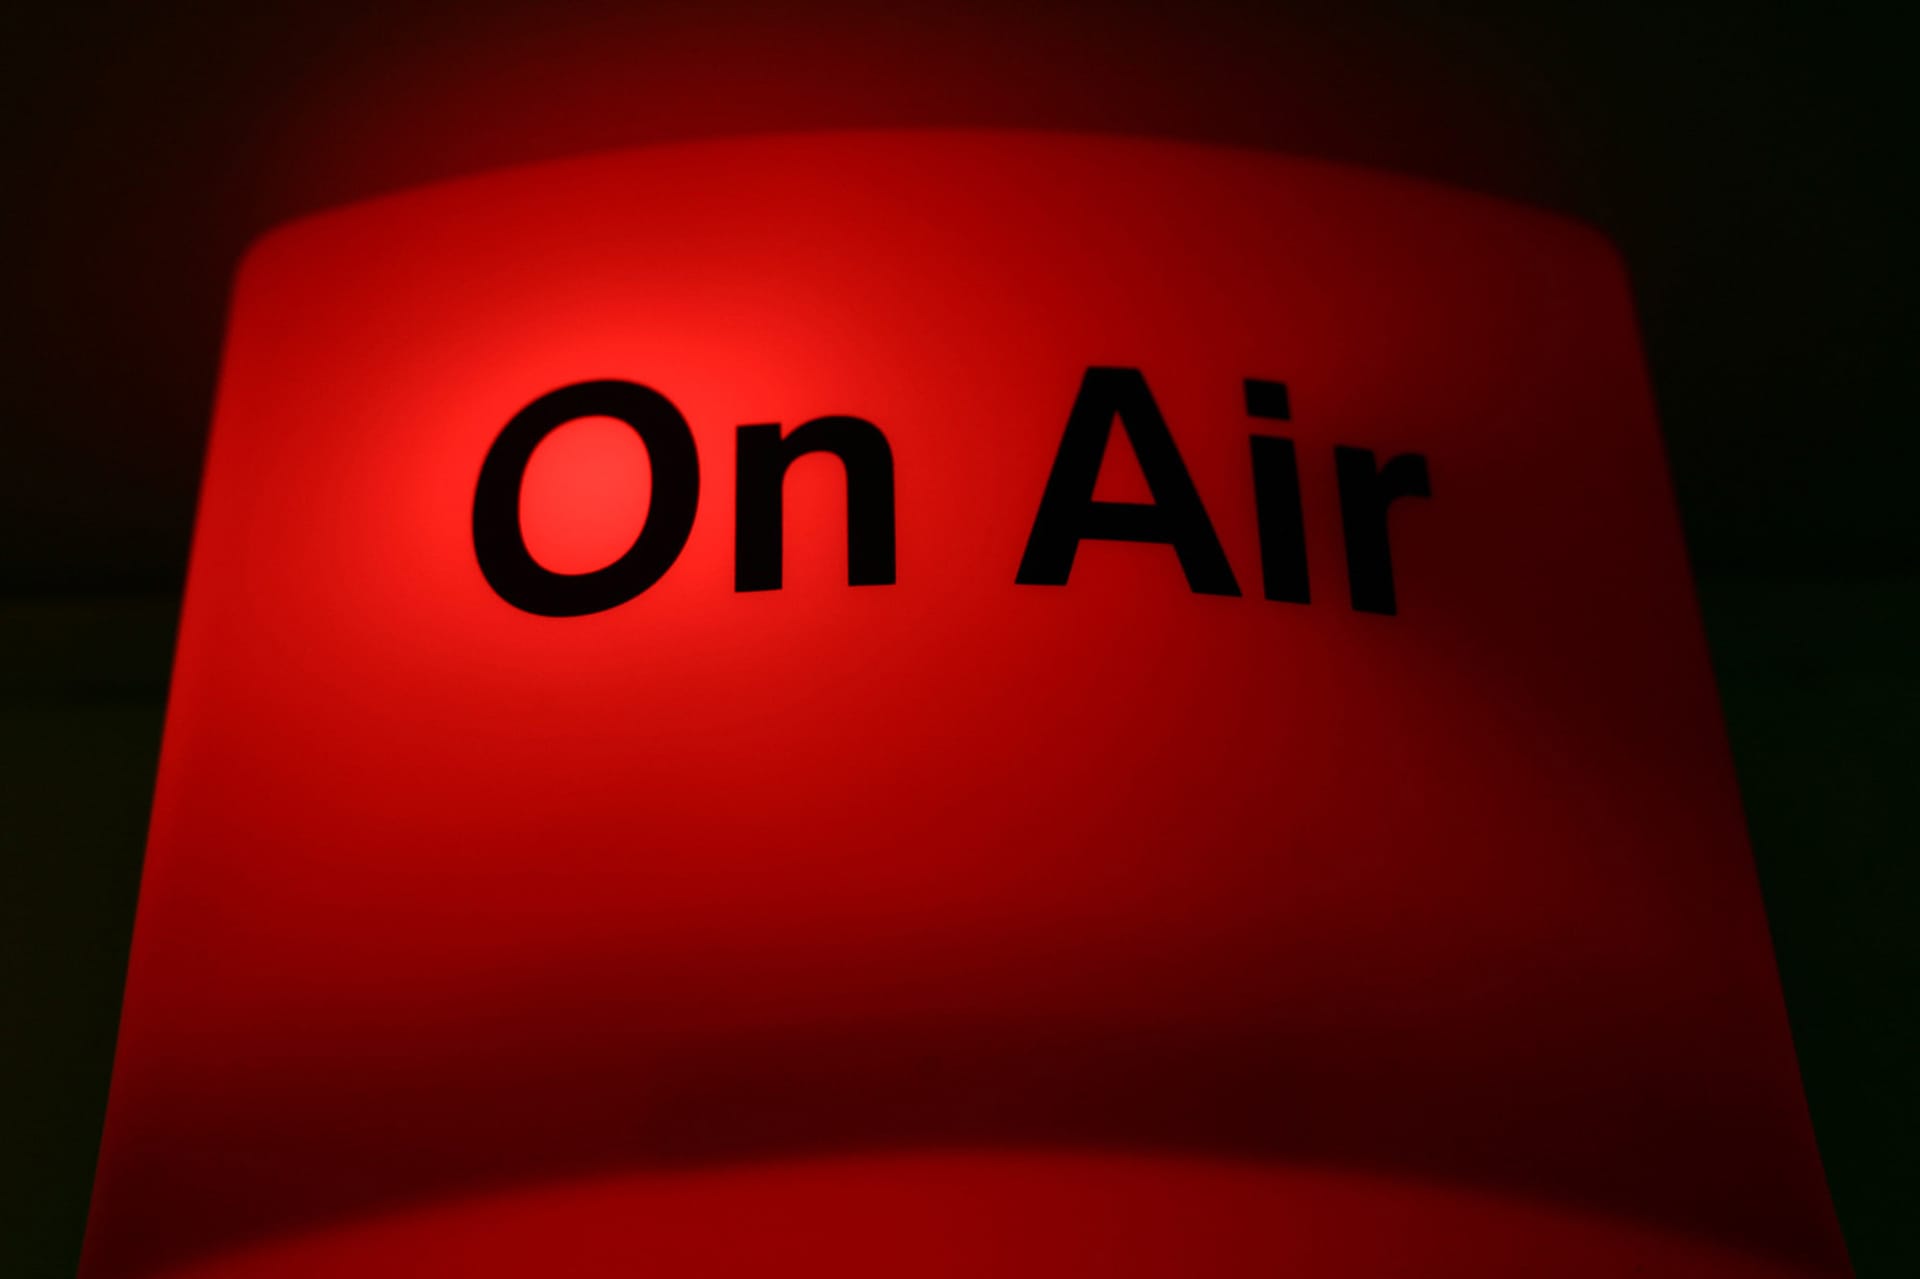 On-Air Sign